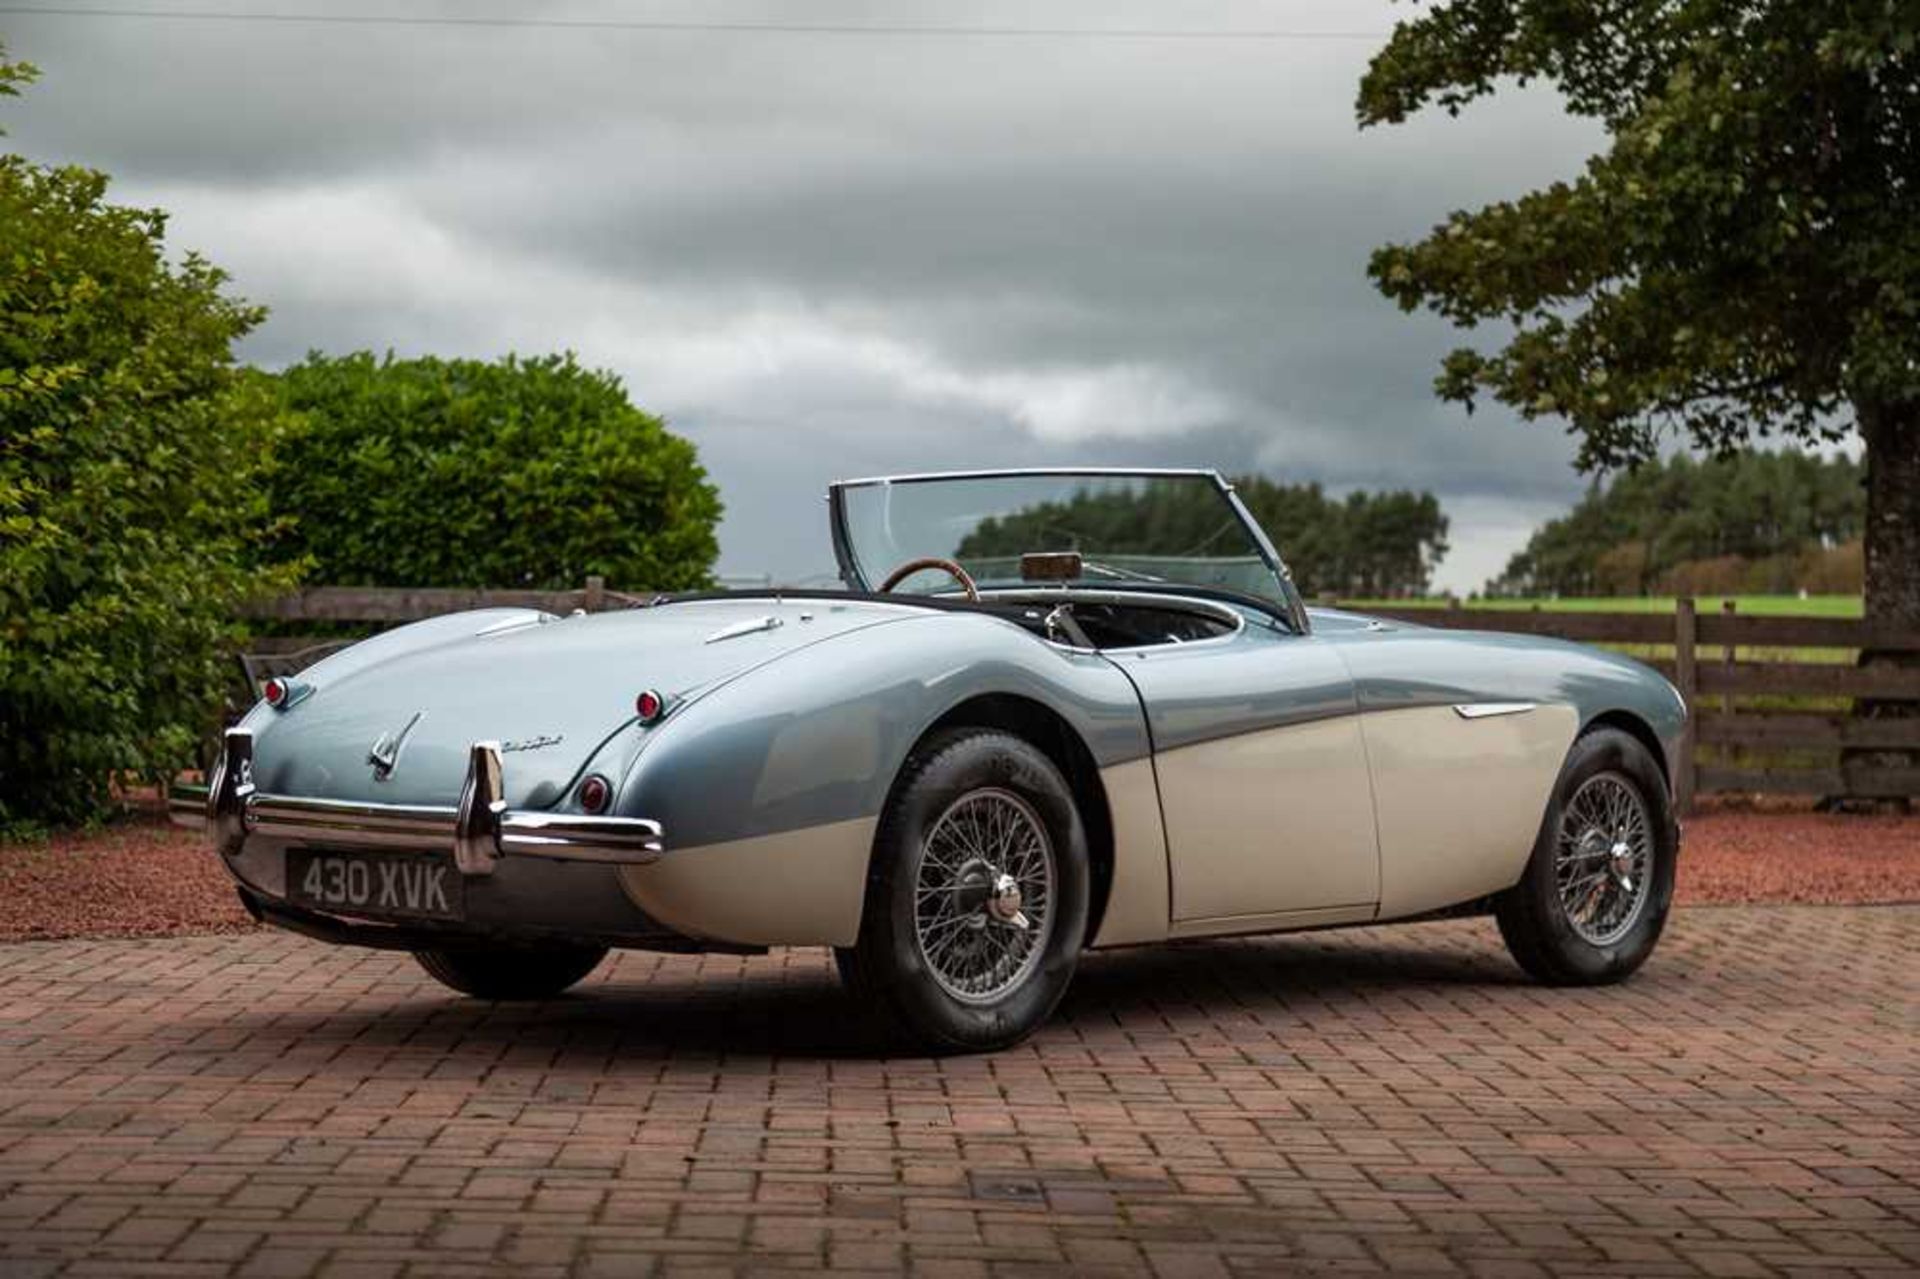 1955 Austin-Healey 100/4 Subtly Upgraded with 5-Speed Transmission and Front Disc Brakes - Image 52 of 54